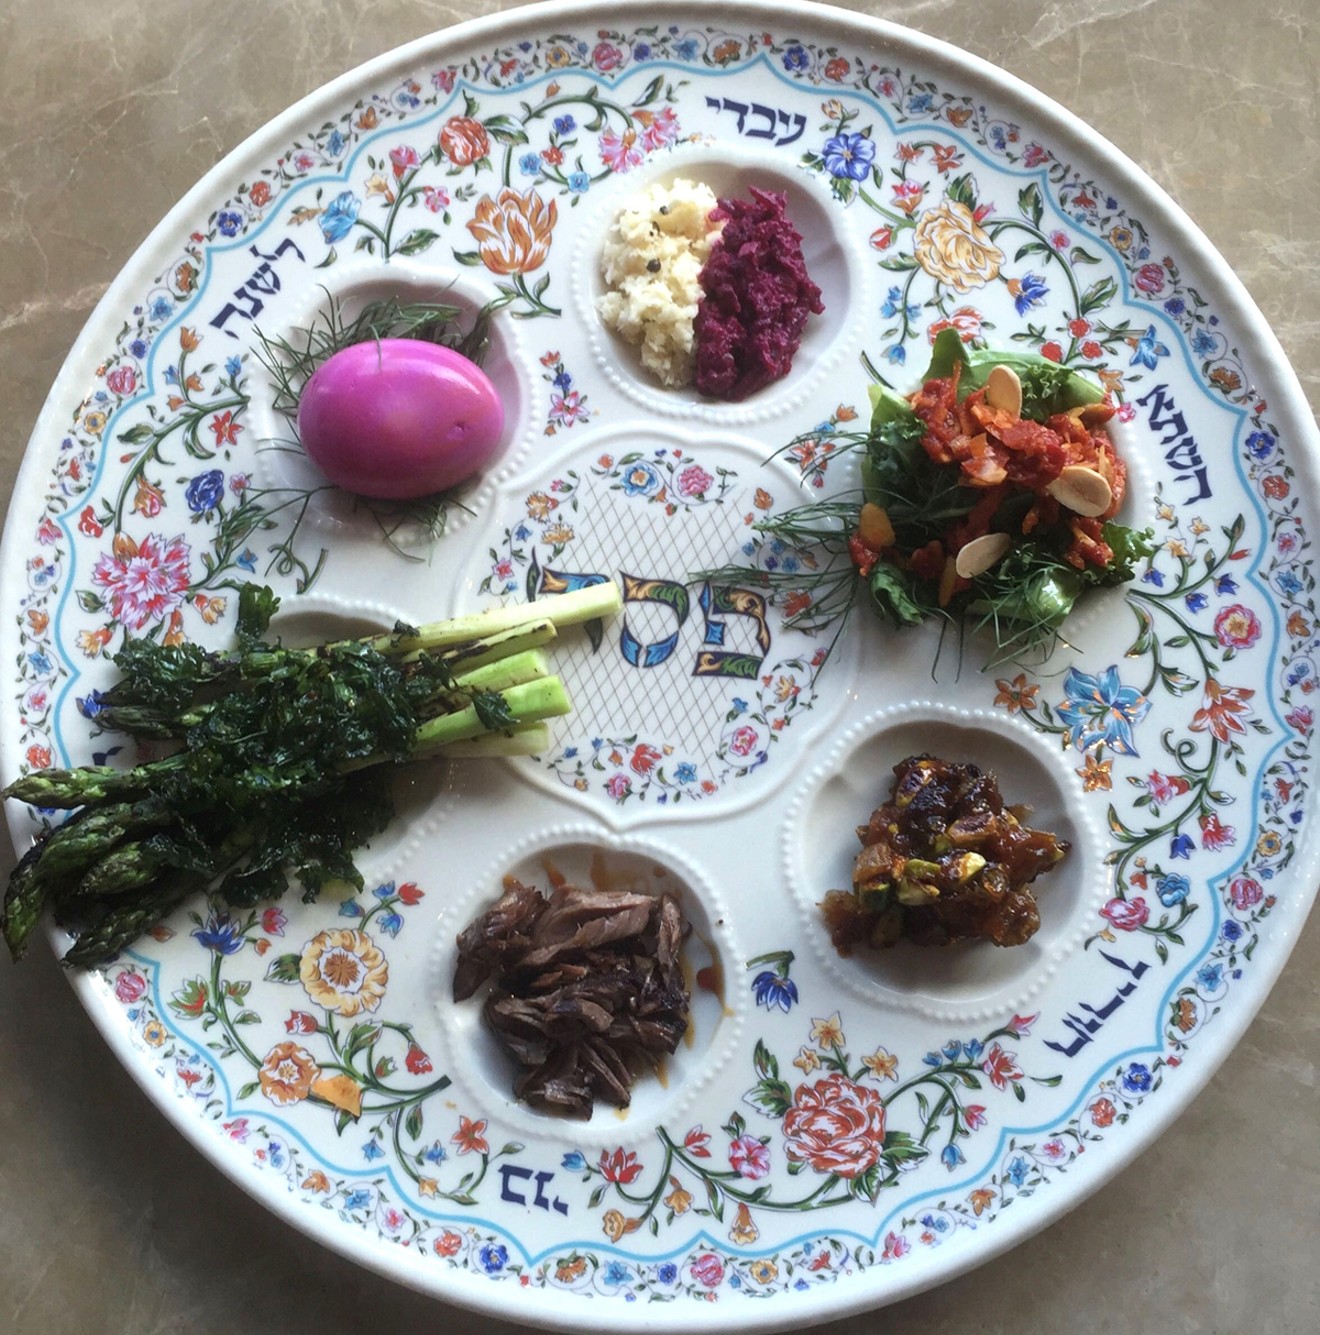 A traditional seder plate holds a shank bone, egg, vegetable, bitter herbs and charoset.